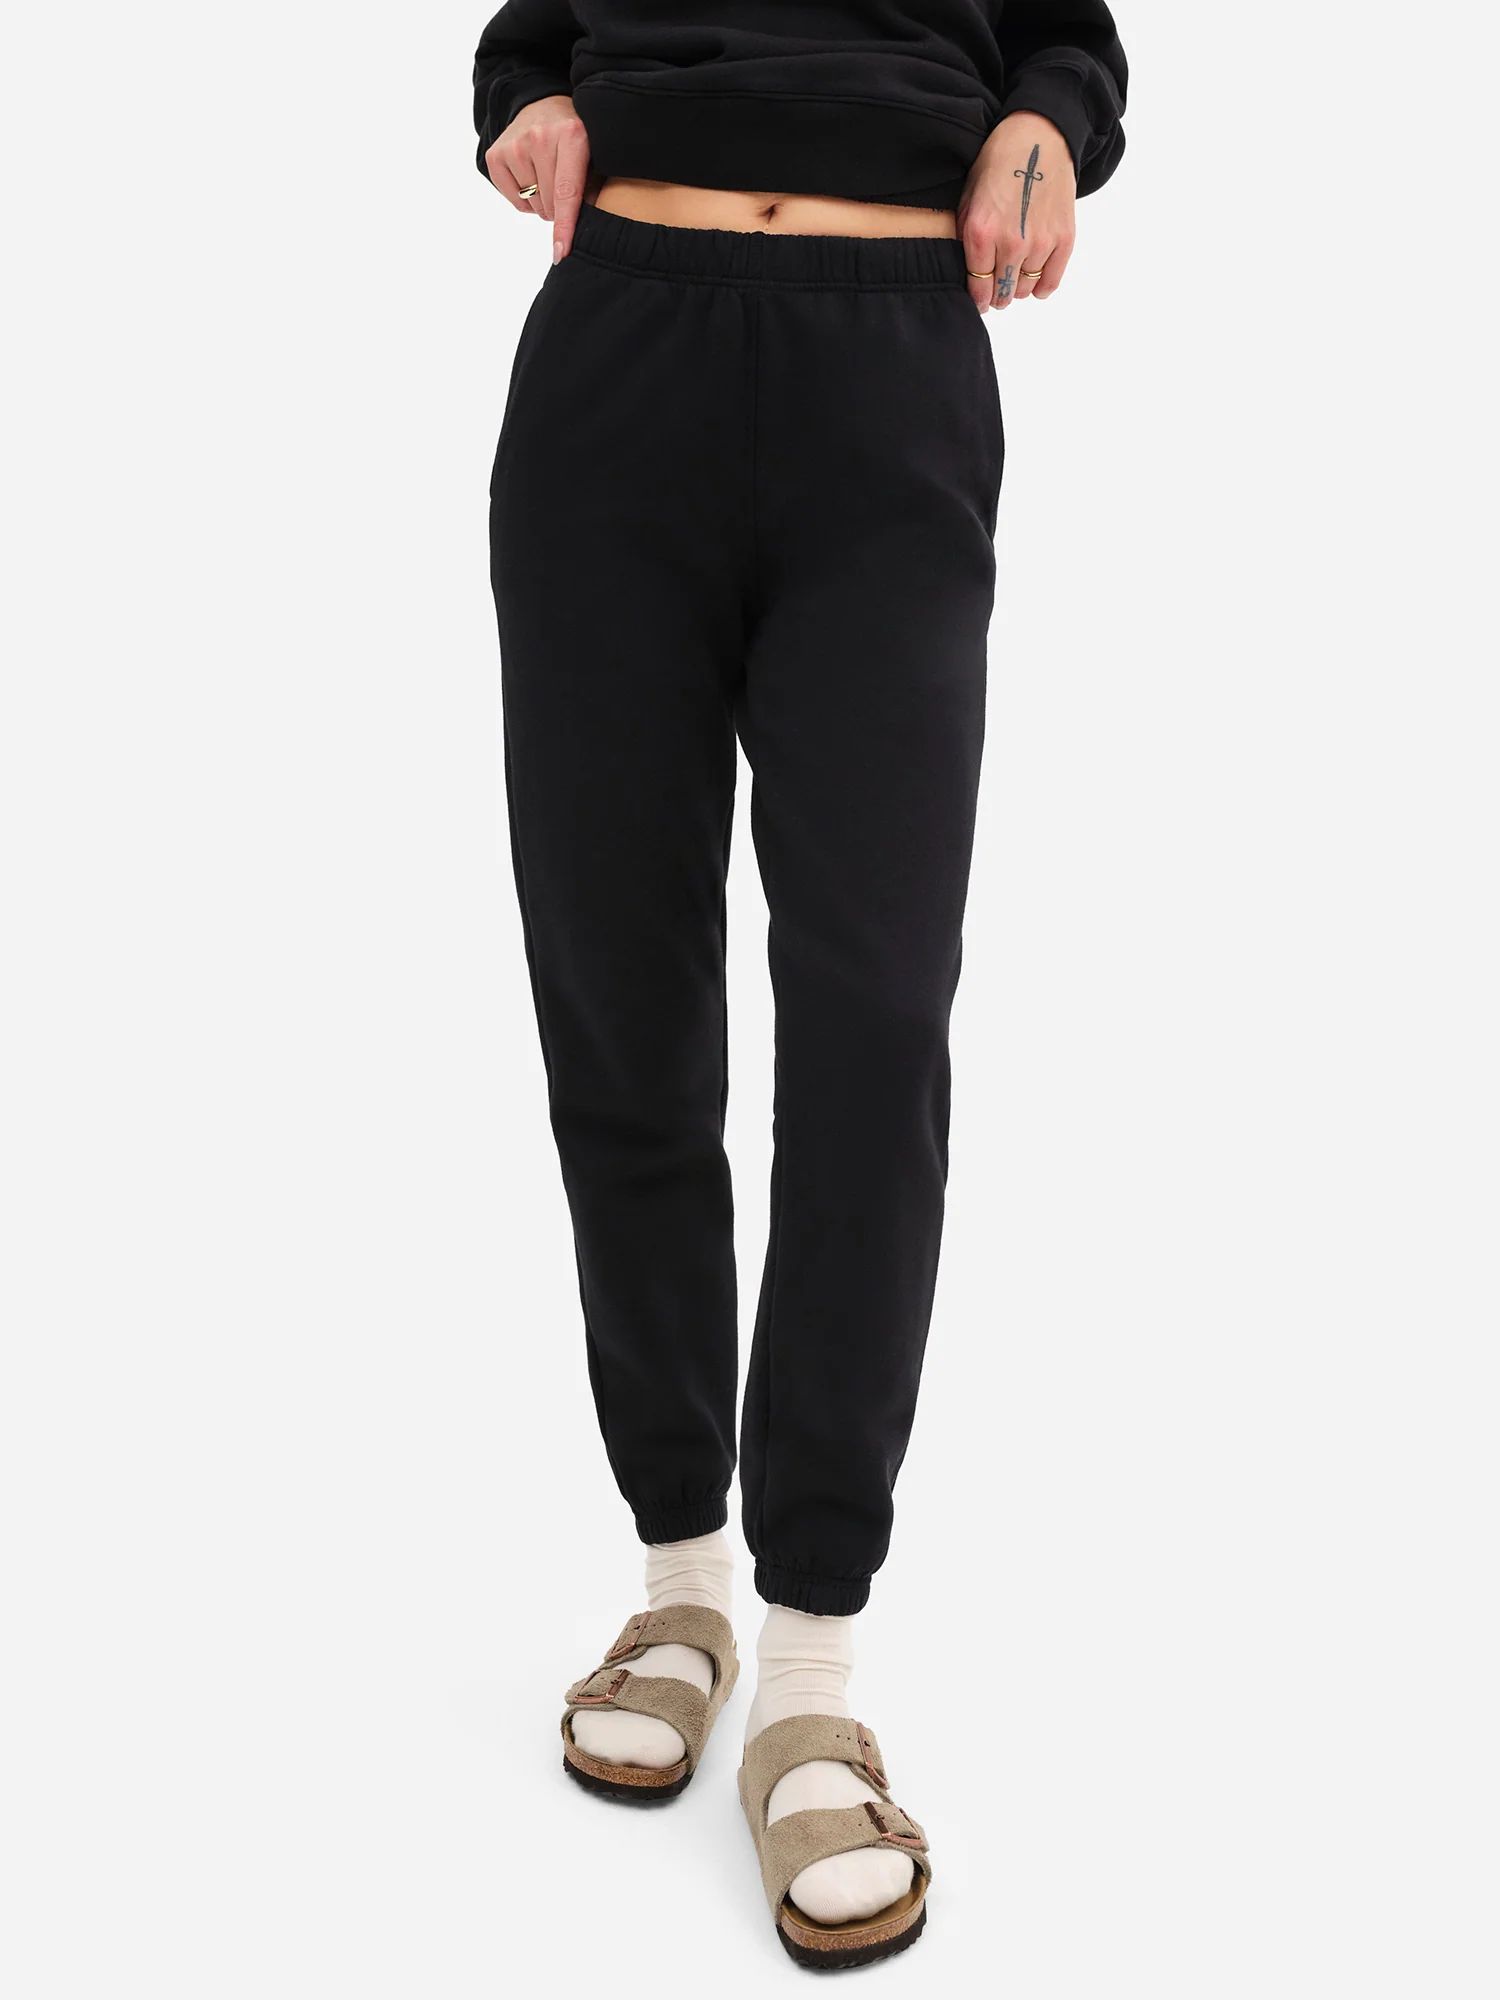 Organic Fleece Relaxed Pocket Sweatpant | MATE The Label